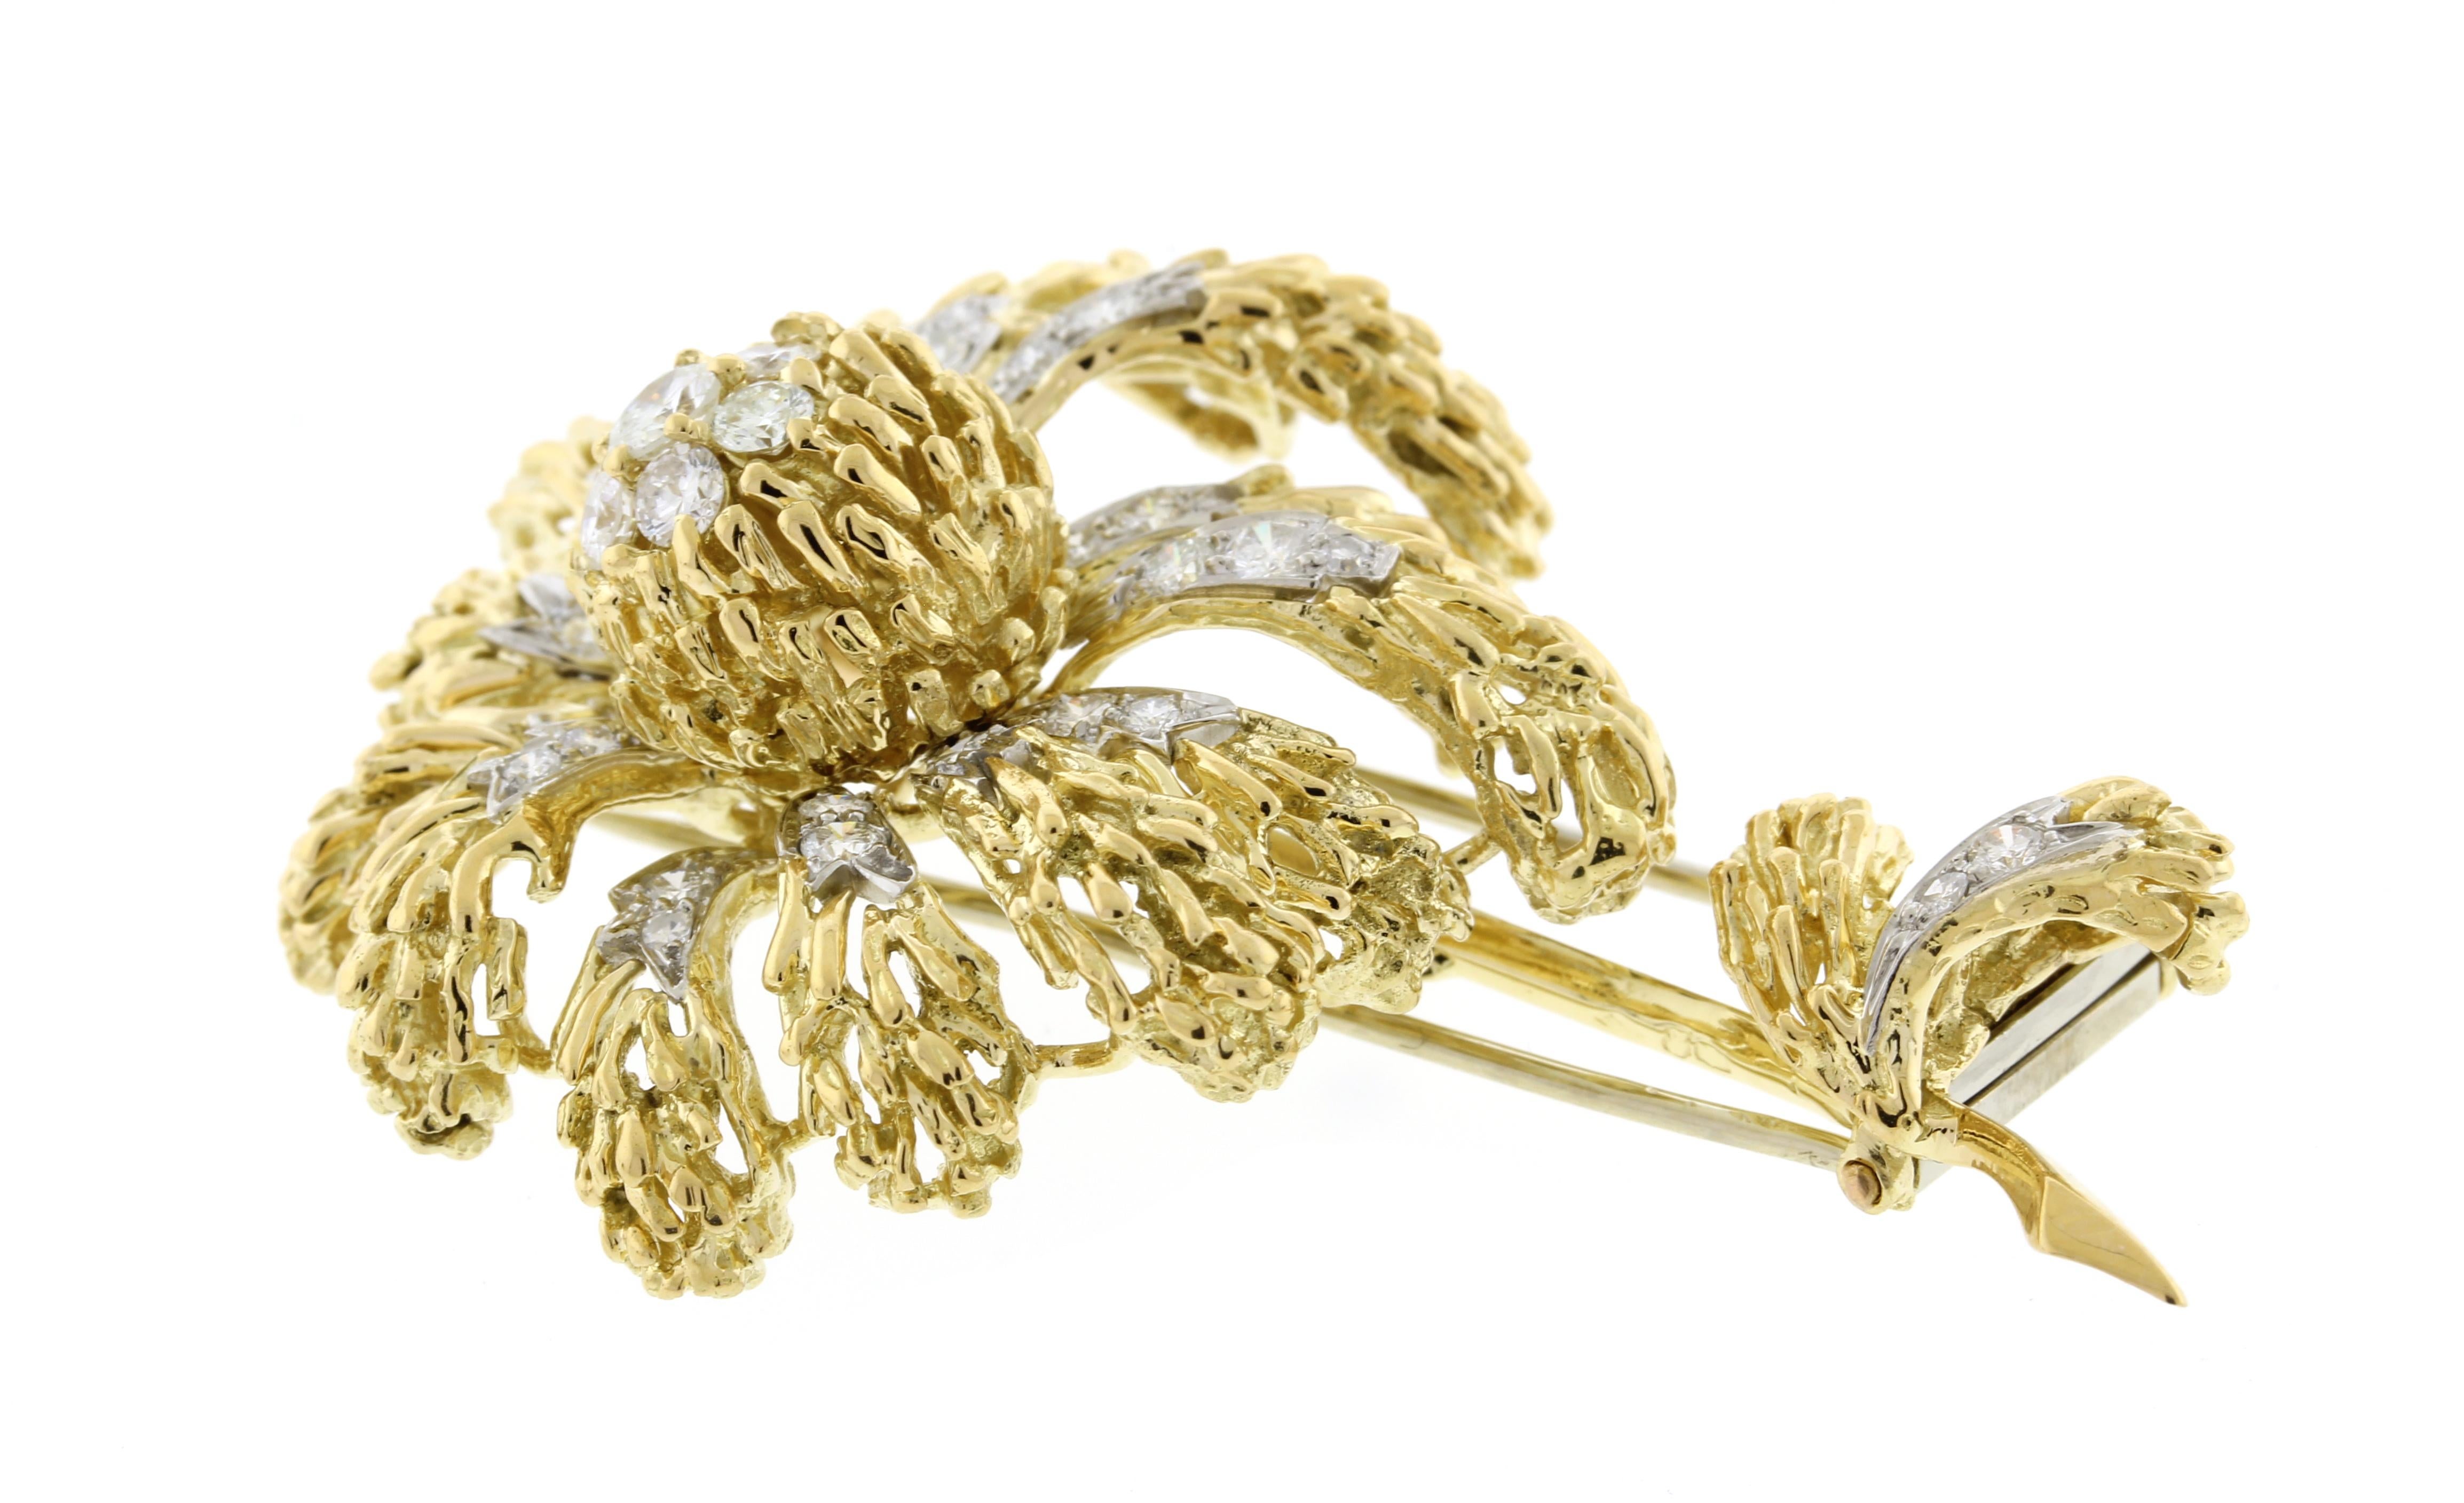 From Van Cleef & Arpel of Paris, a stylish chrysanthemum diamond brooch.  The brooch is expertly design and made in VCA's detective style
• Designer: VCA
• Metal:  18 karat gold
• Circa: 1970s
• Size: 2¼ by ½
• 35 Diamonds weigh 1.50 carats
•